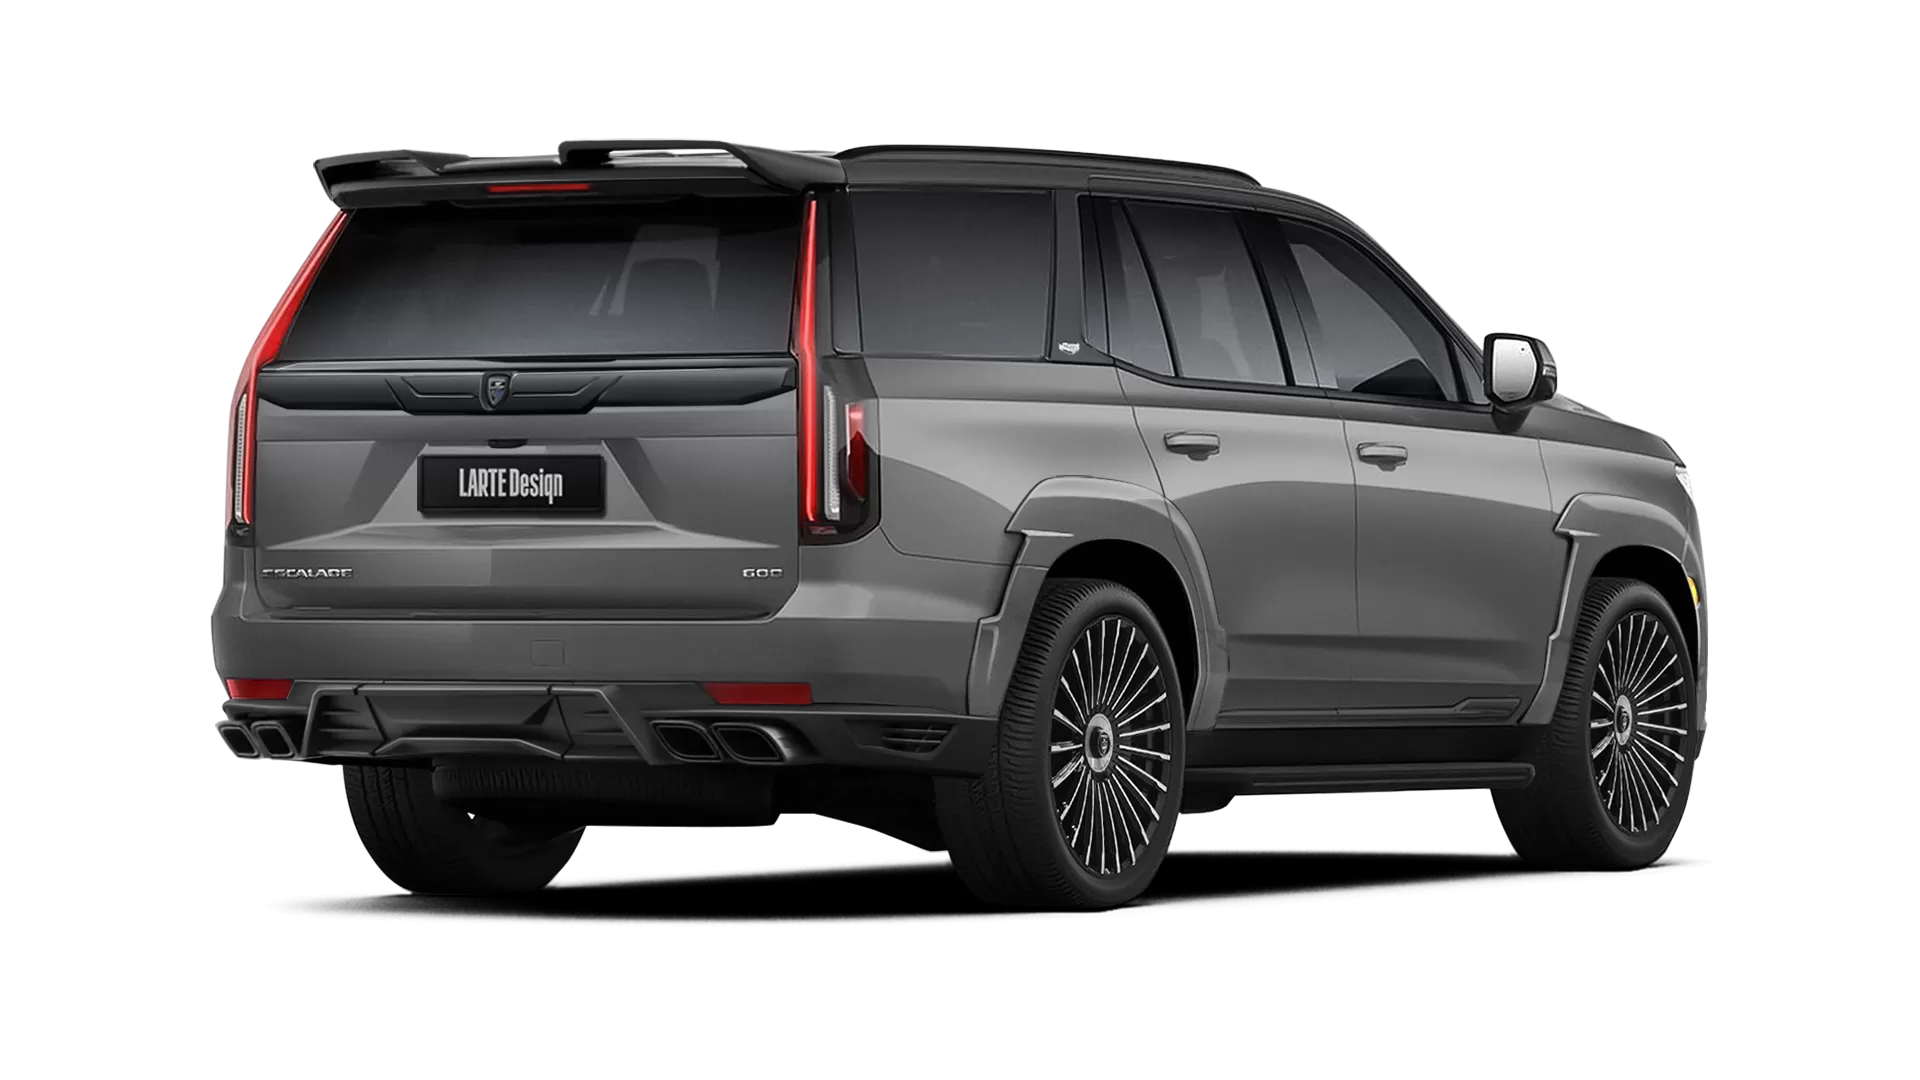 Cadillac Escalade ESV GMT 1XX with painted body kit: rear view shown in Satin Steel Metallic